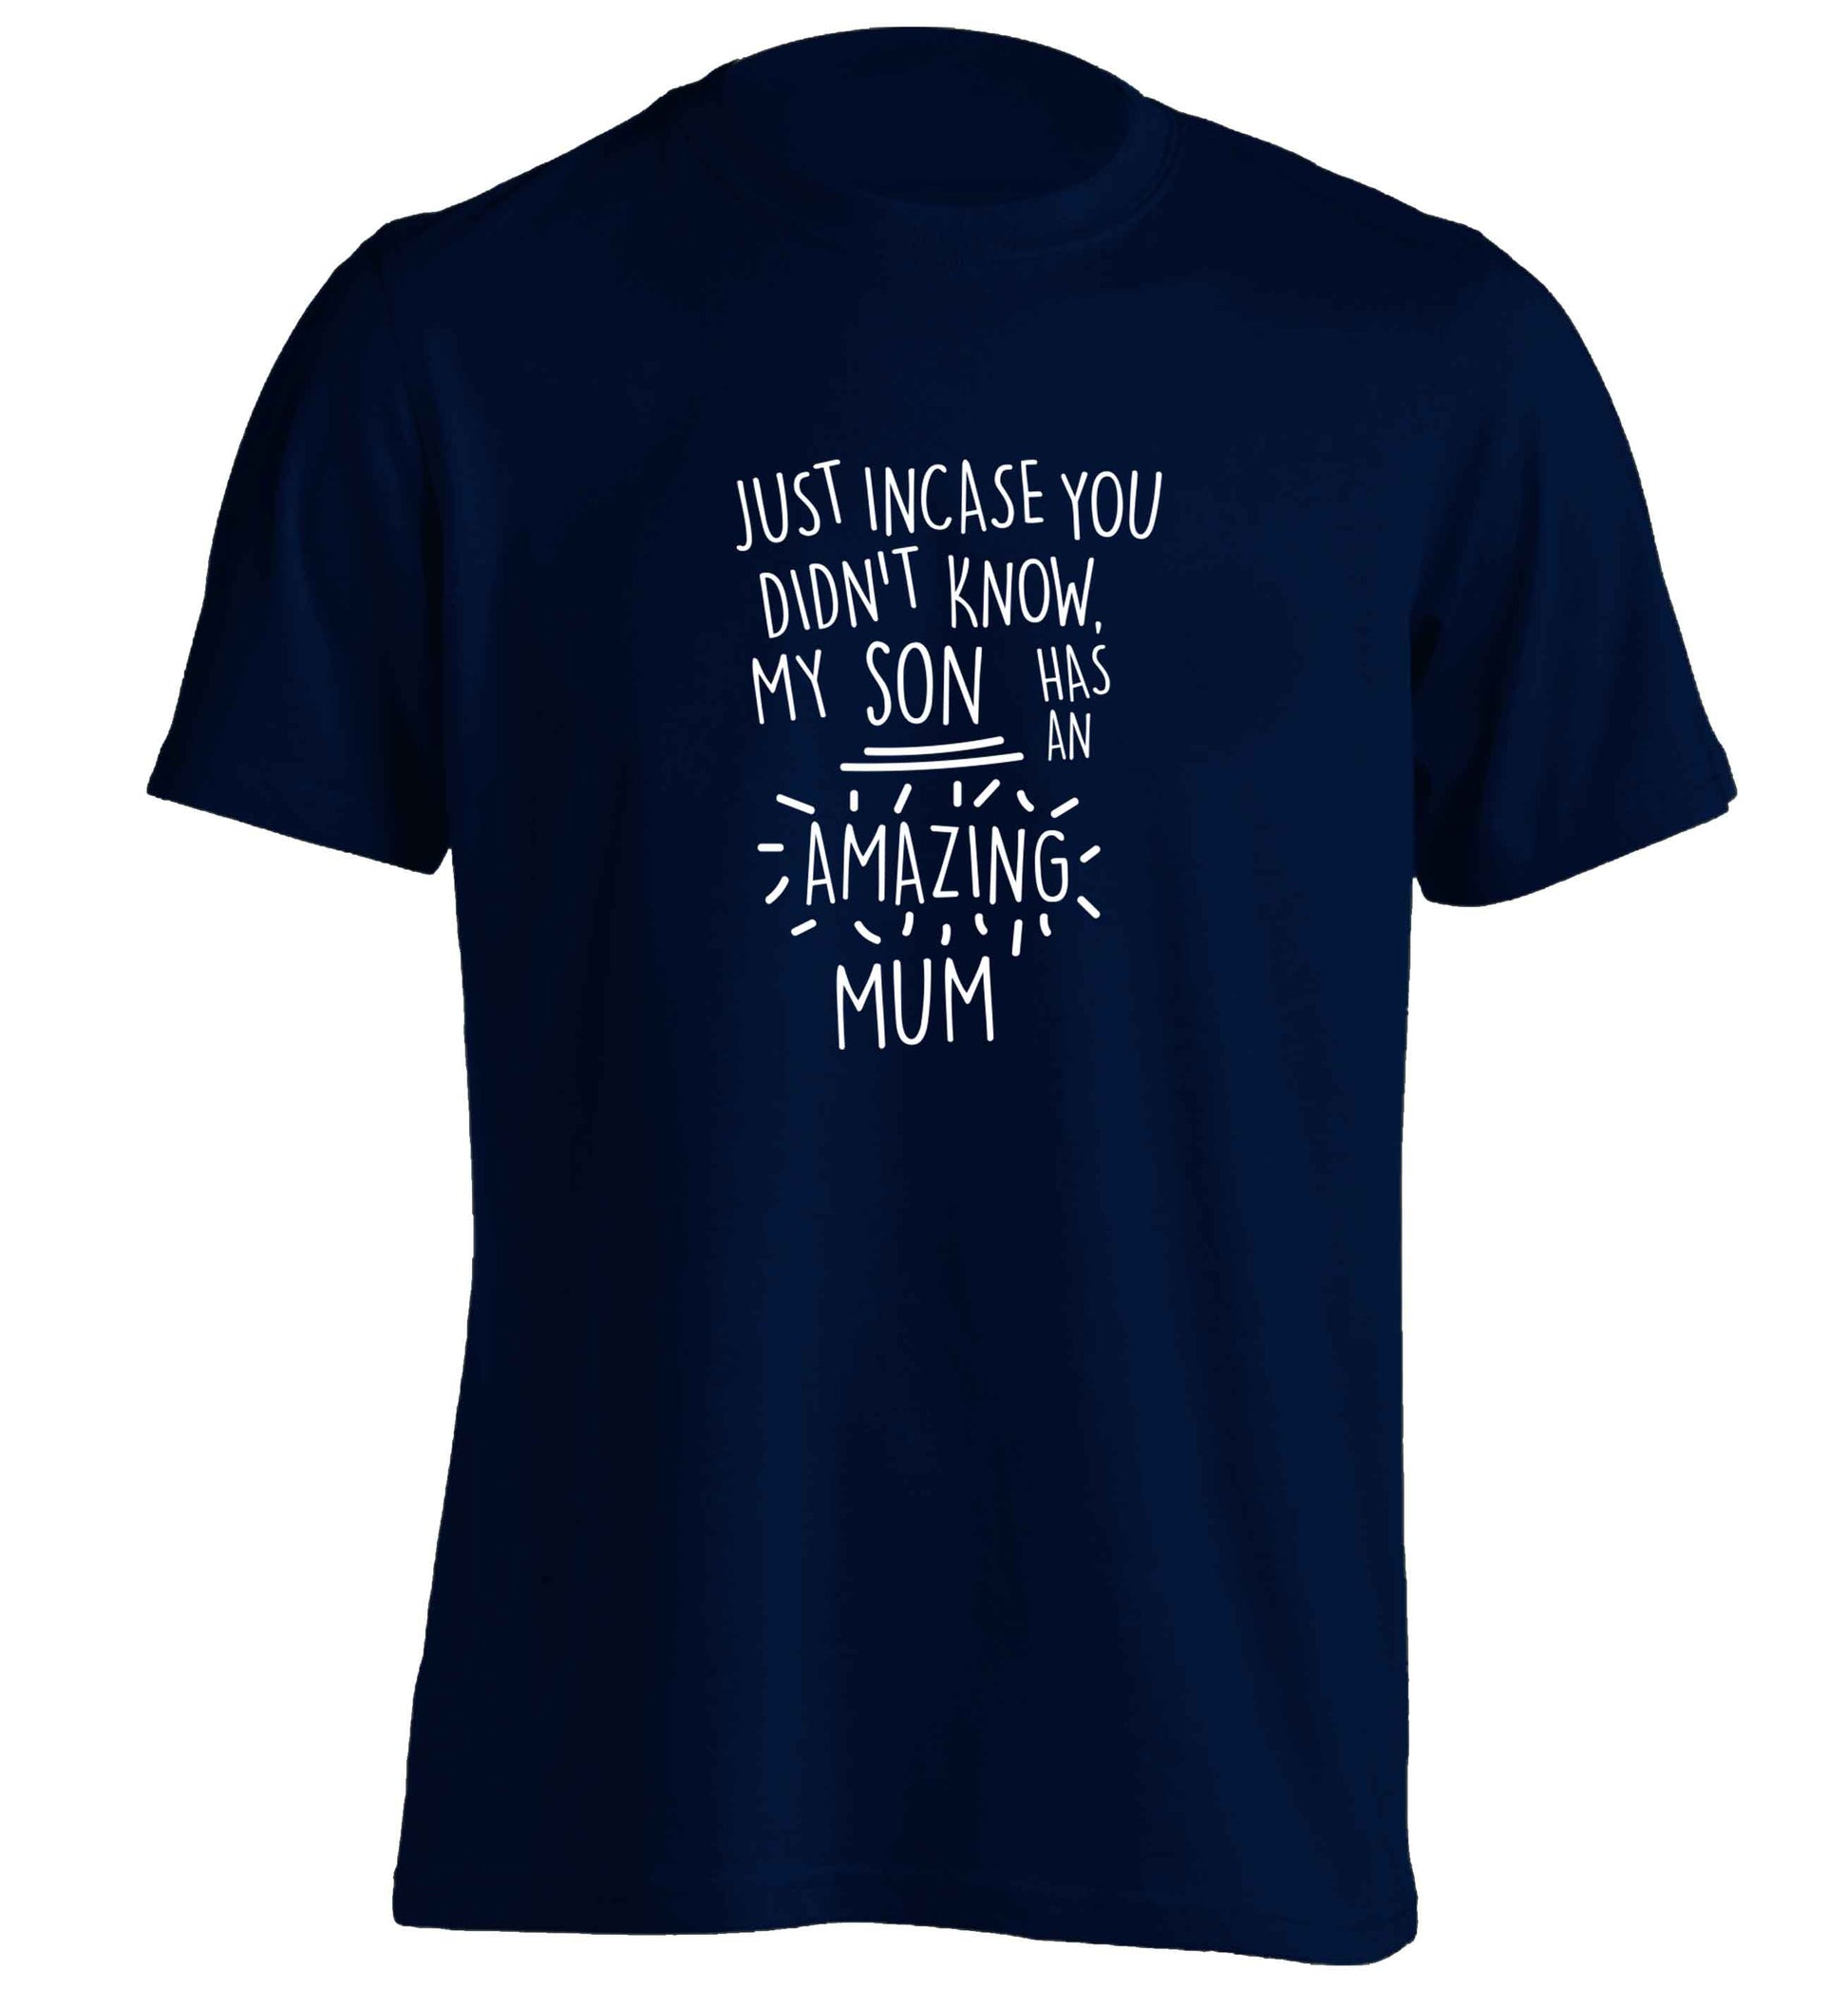 Just incase you didn't know my son has an amazing mum adults unisex navy Tshirt 2XL